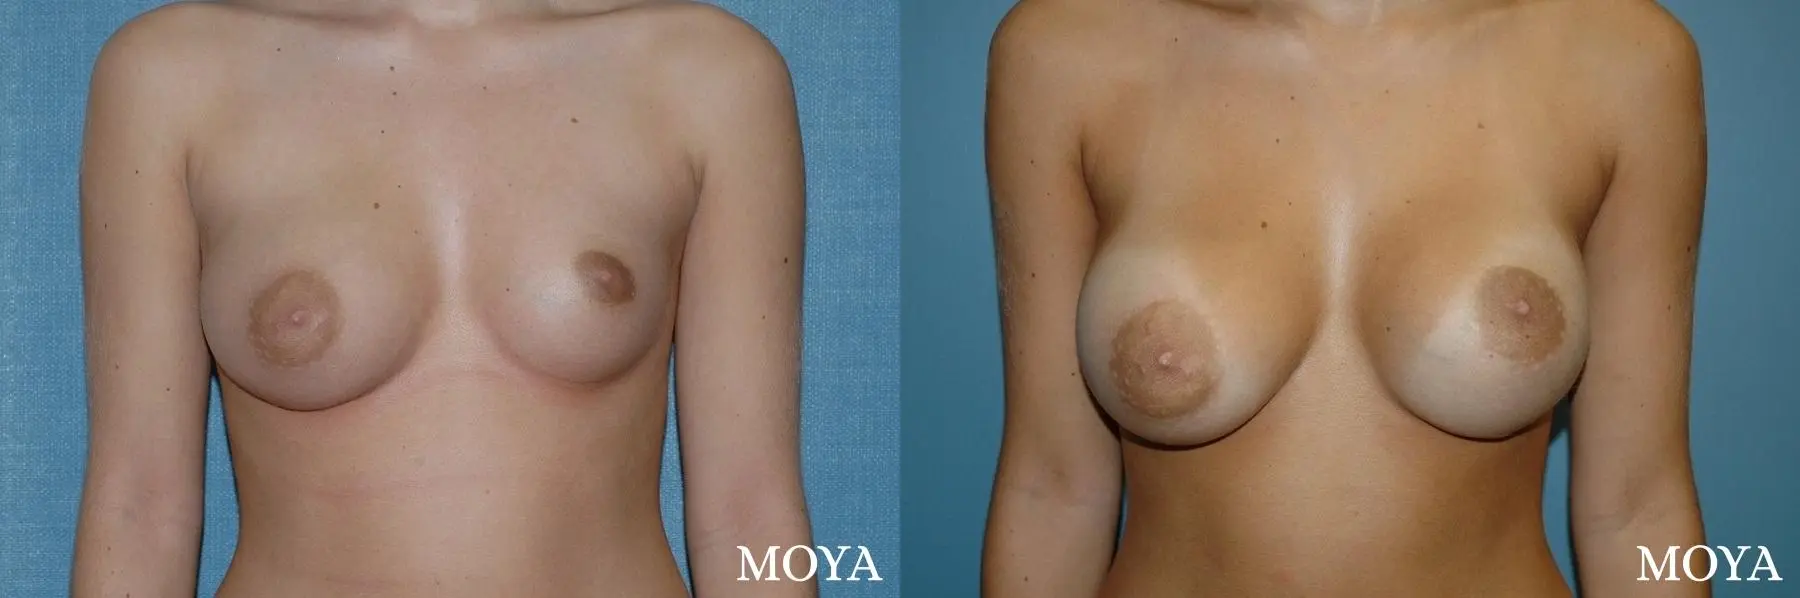 Breast Asymmetry: Patient 1 - Before and After  